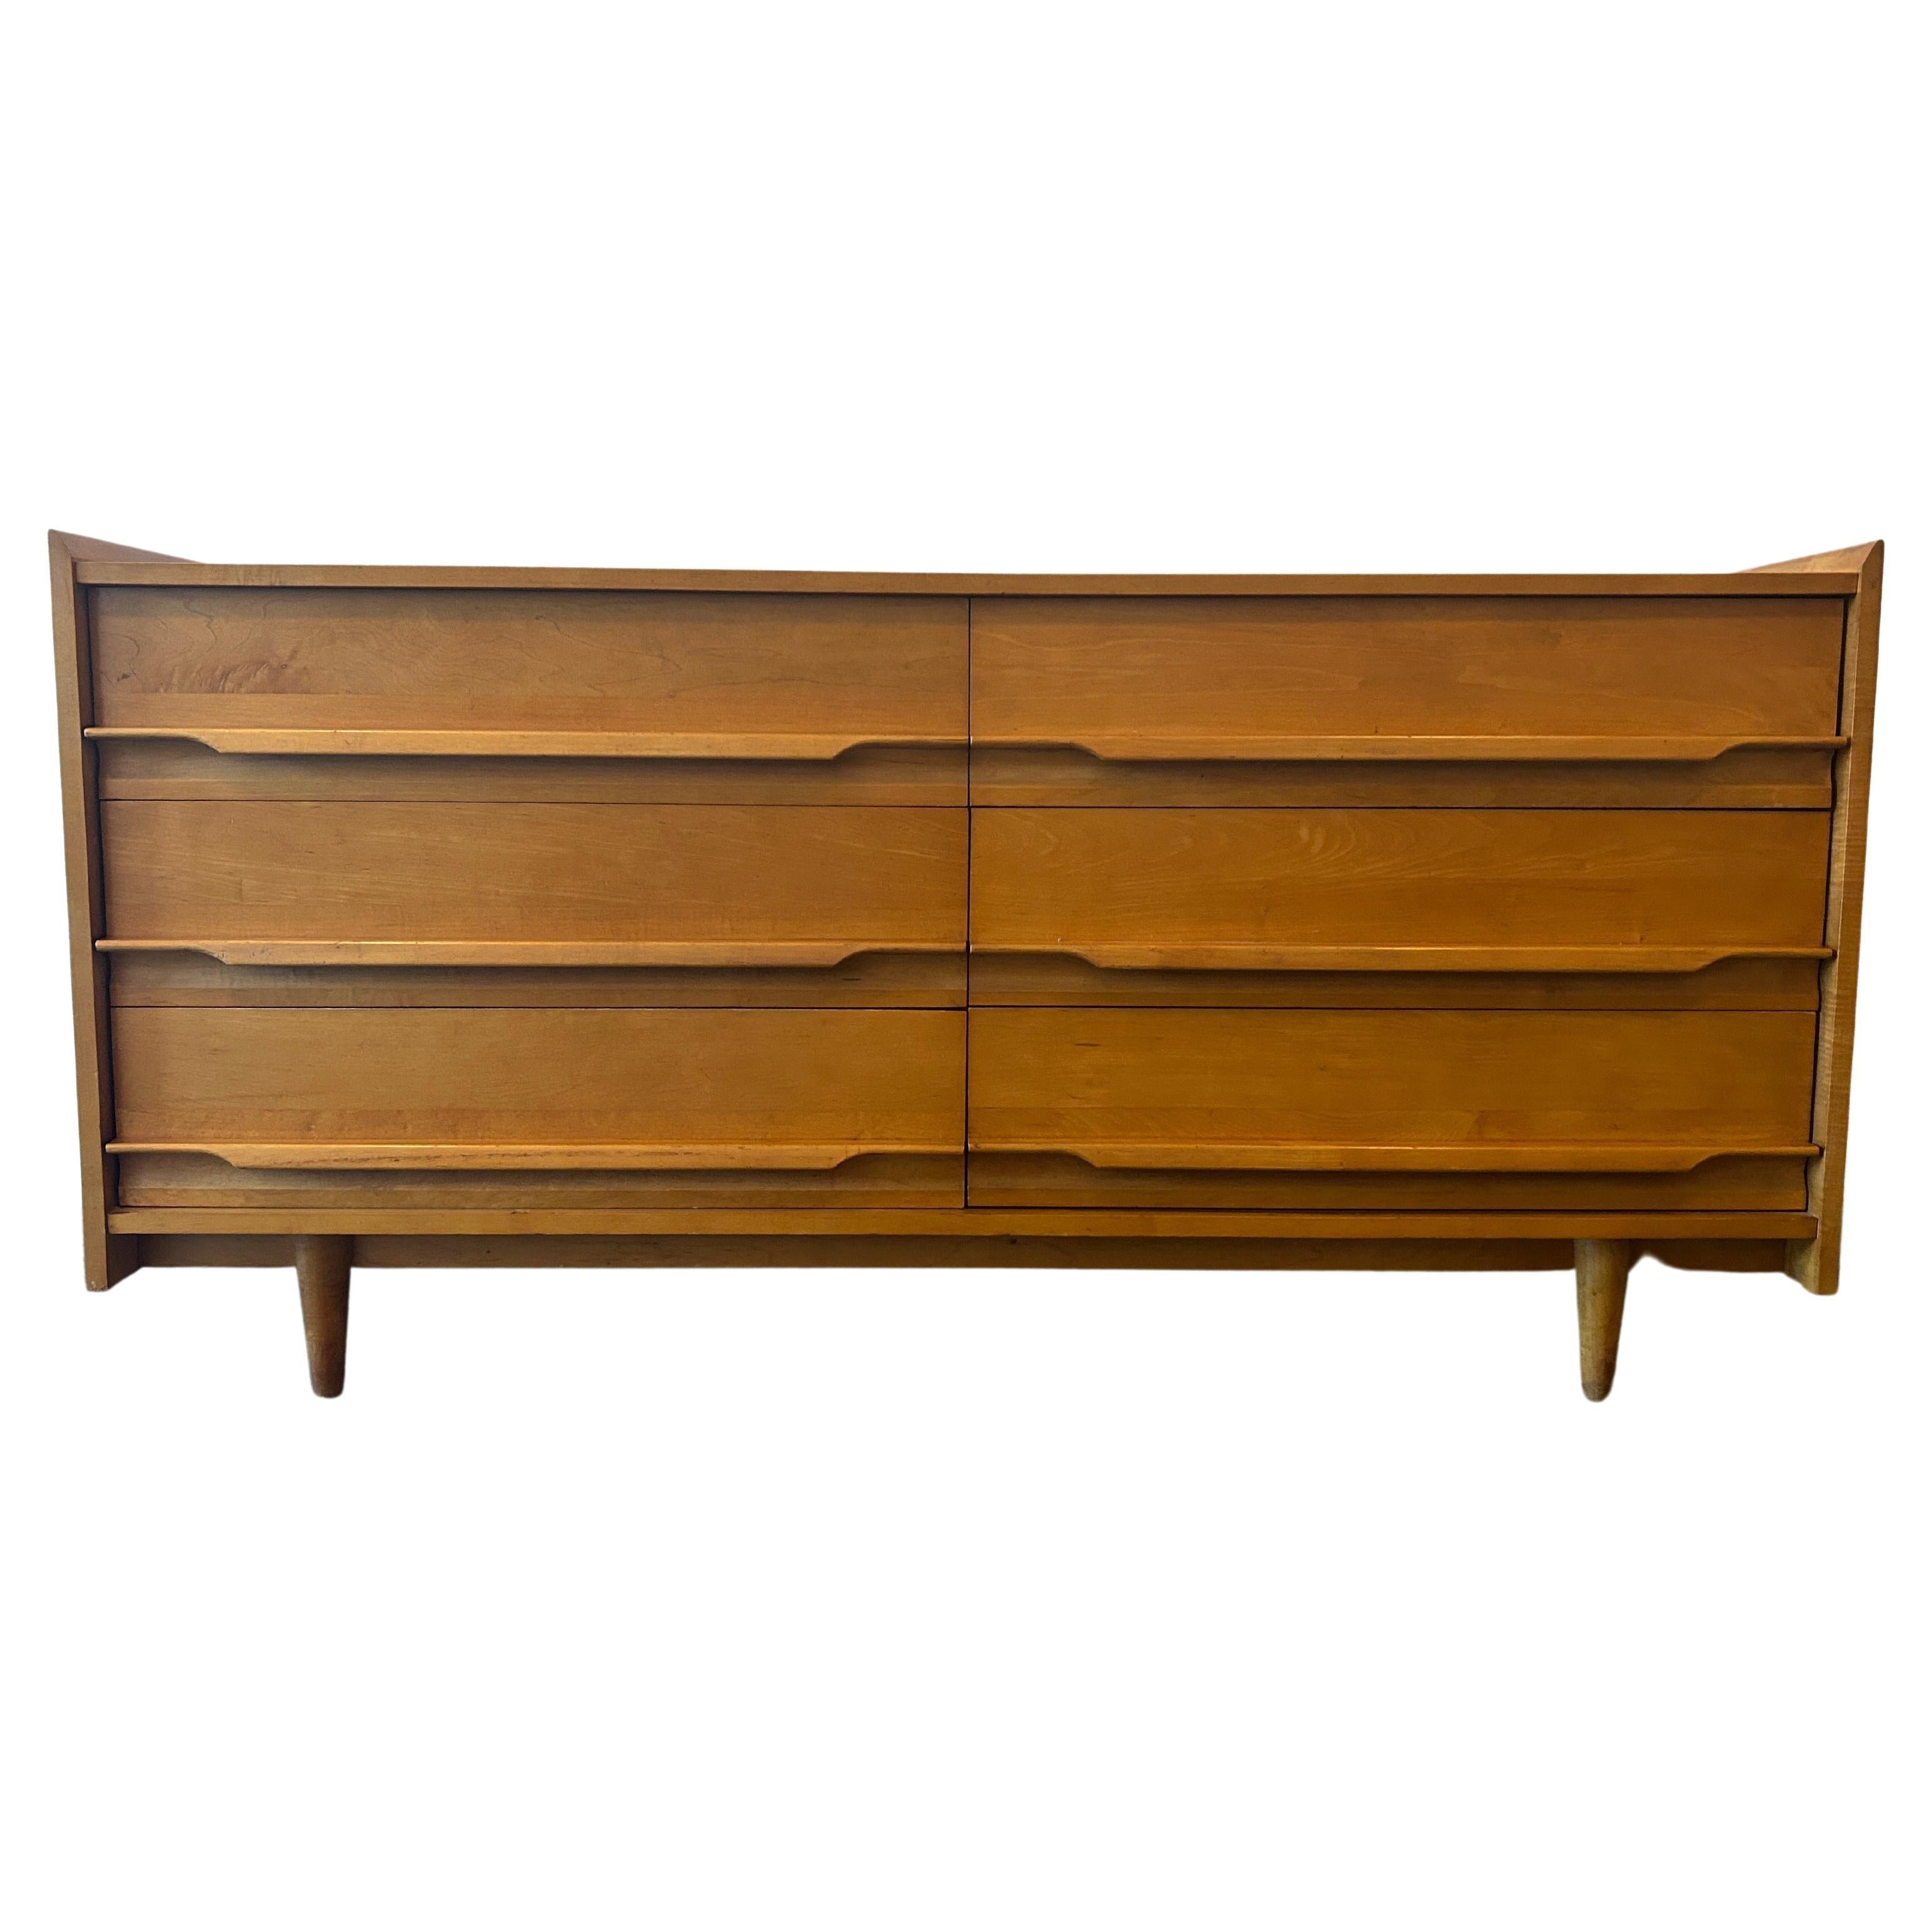 Unique Mid-Century Modern American Maple 6 Drawer Dresser Credenza by Crawford For Sale